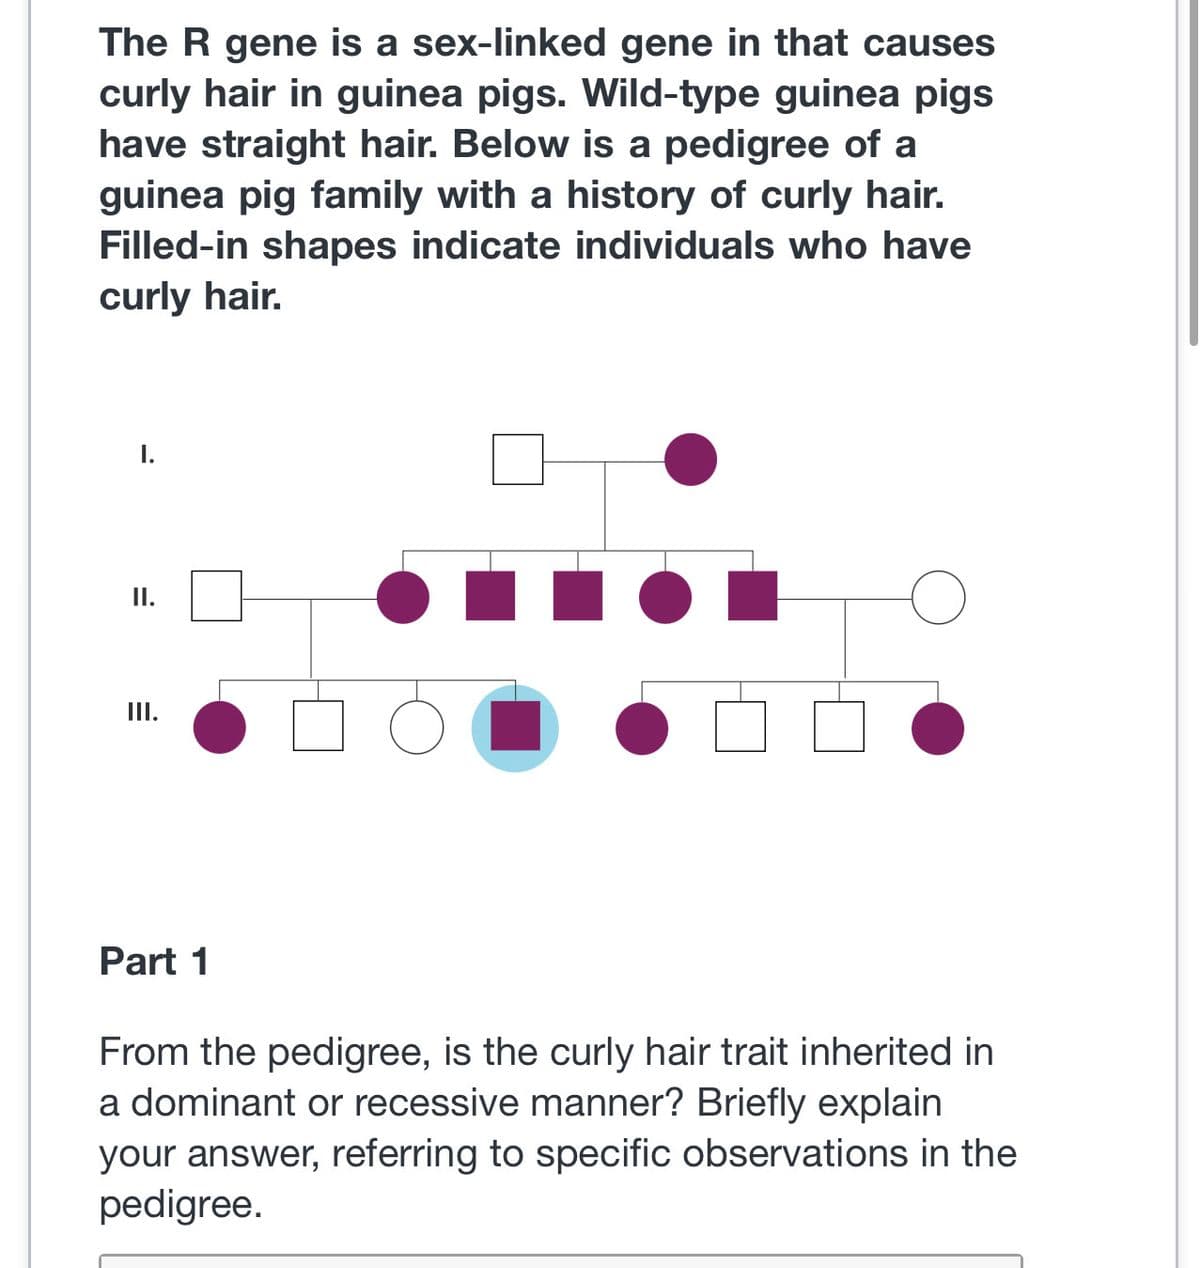 The R gene is a sex-linked gene in that causes
curly hair in guinea pigs. Wild-type guinea pigs
have straight hair. Below is a pedigree of a
guinea pig family with a history of curly hair.
Filled-in shapes indicate individuals who have
curly hair.
I.
II.
III.
Part 1
From the pedigree, is the curly hair trait inherited in
a dominant or recessive manner? Briefly explain
your answer, referring to specific observations in the
pedigree.